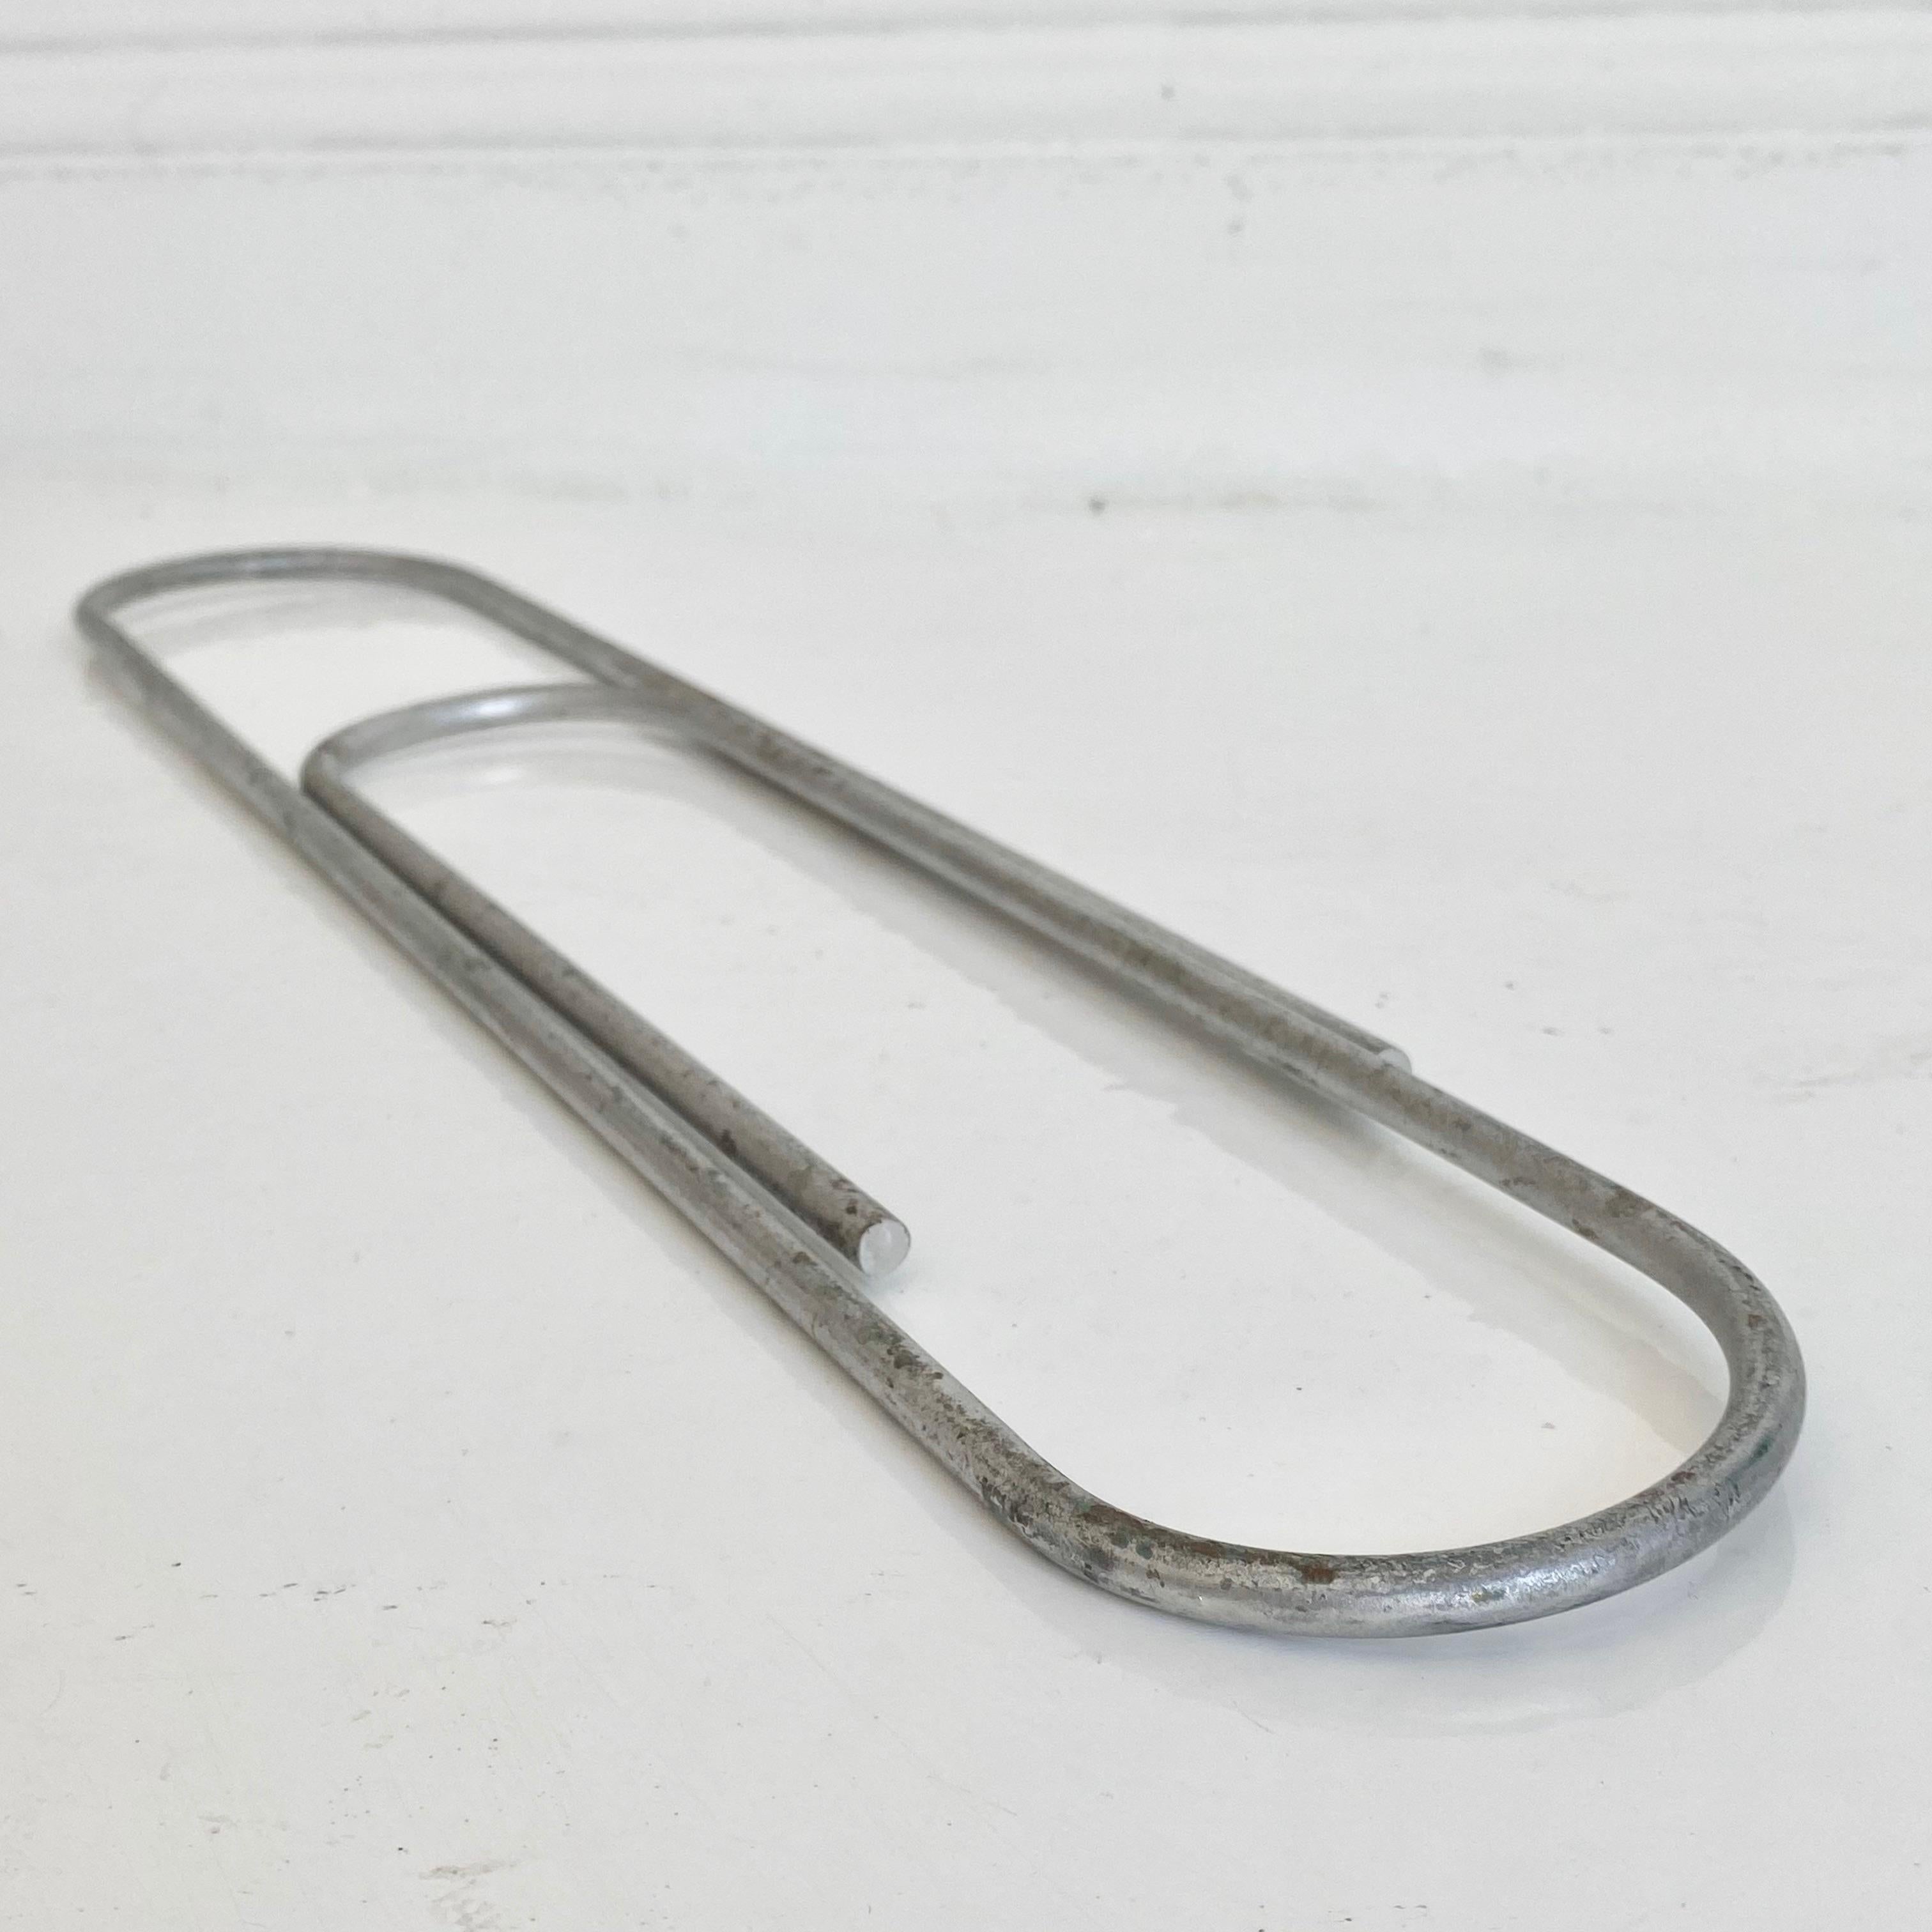 Giant metal paperclip slightly under 1.5 ft tall. Quirky accent piece or wall art. Good weight to object. Slight wear to metal exterior. Good vintage condition. Two available. Priced individually. Slightly different age/patina to both. 
 